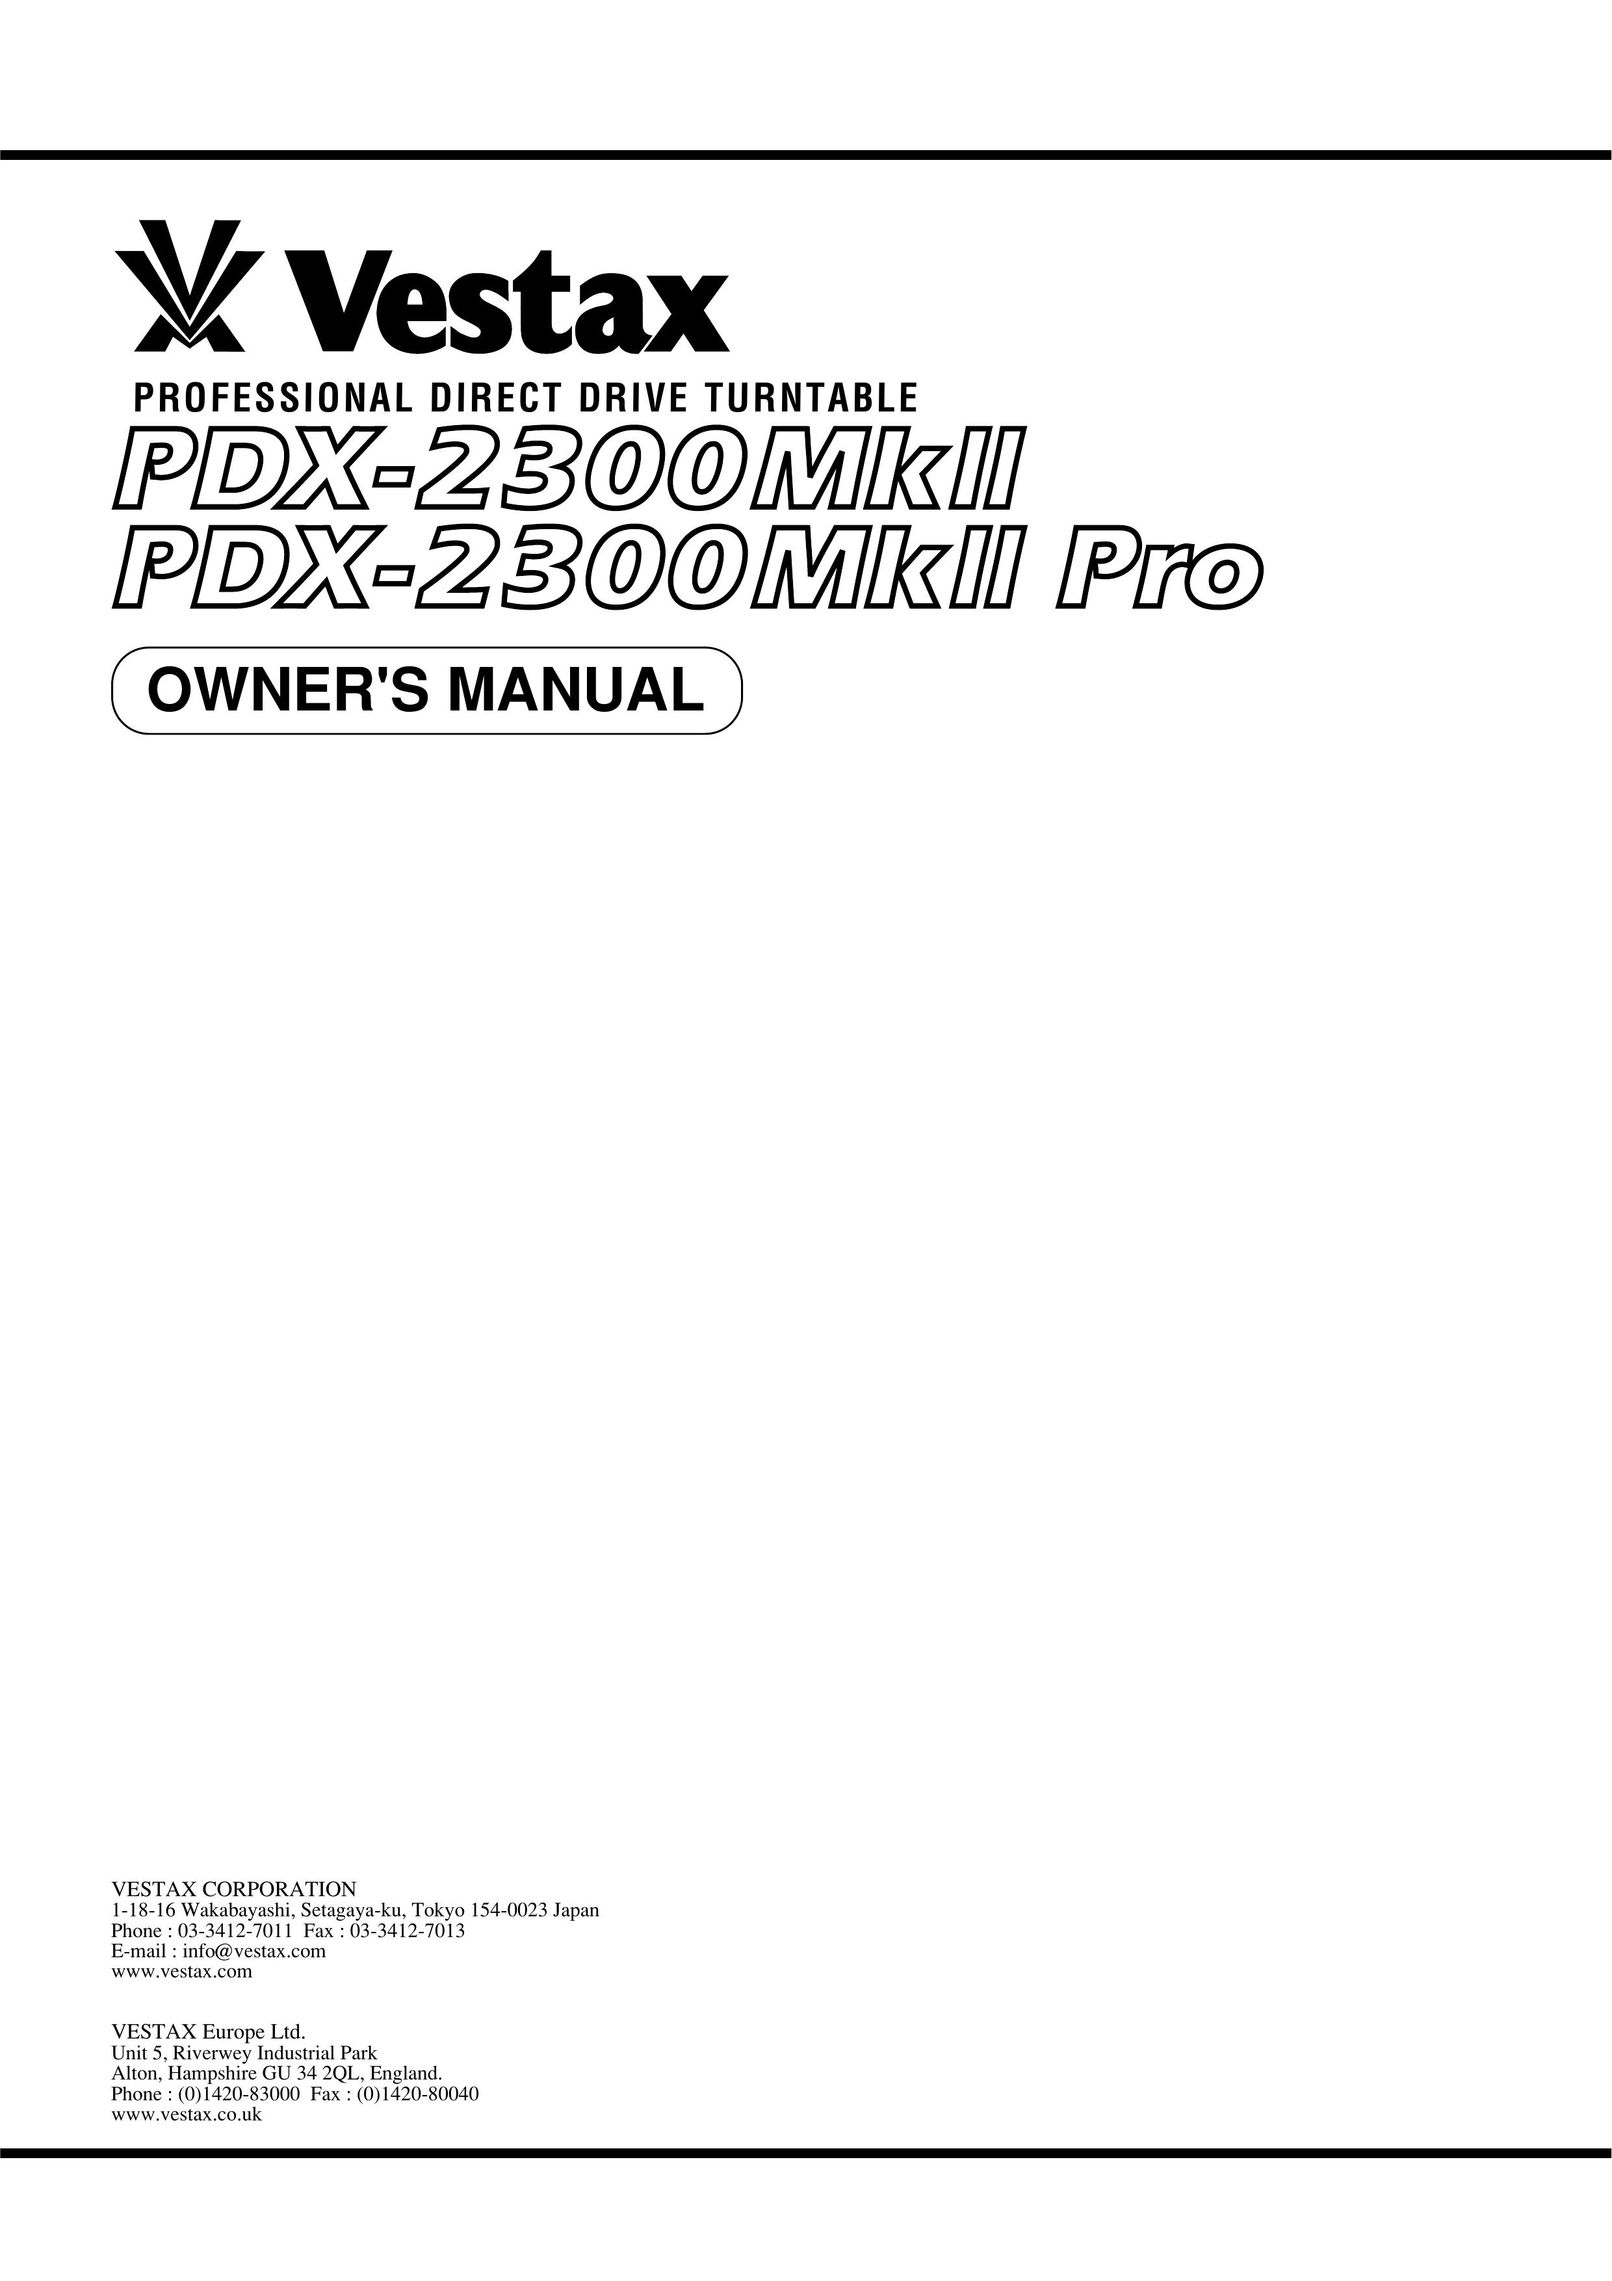 Vestax PDX-2300 MkII PDX-2300 MkII Pro Turntable User Manual